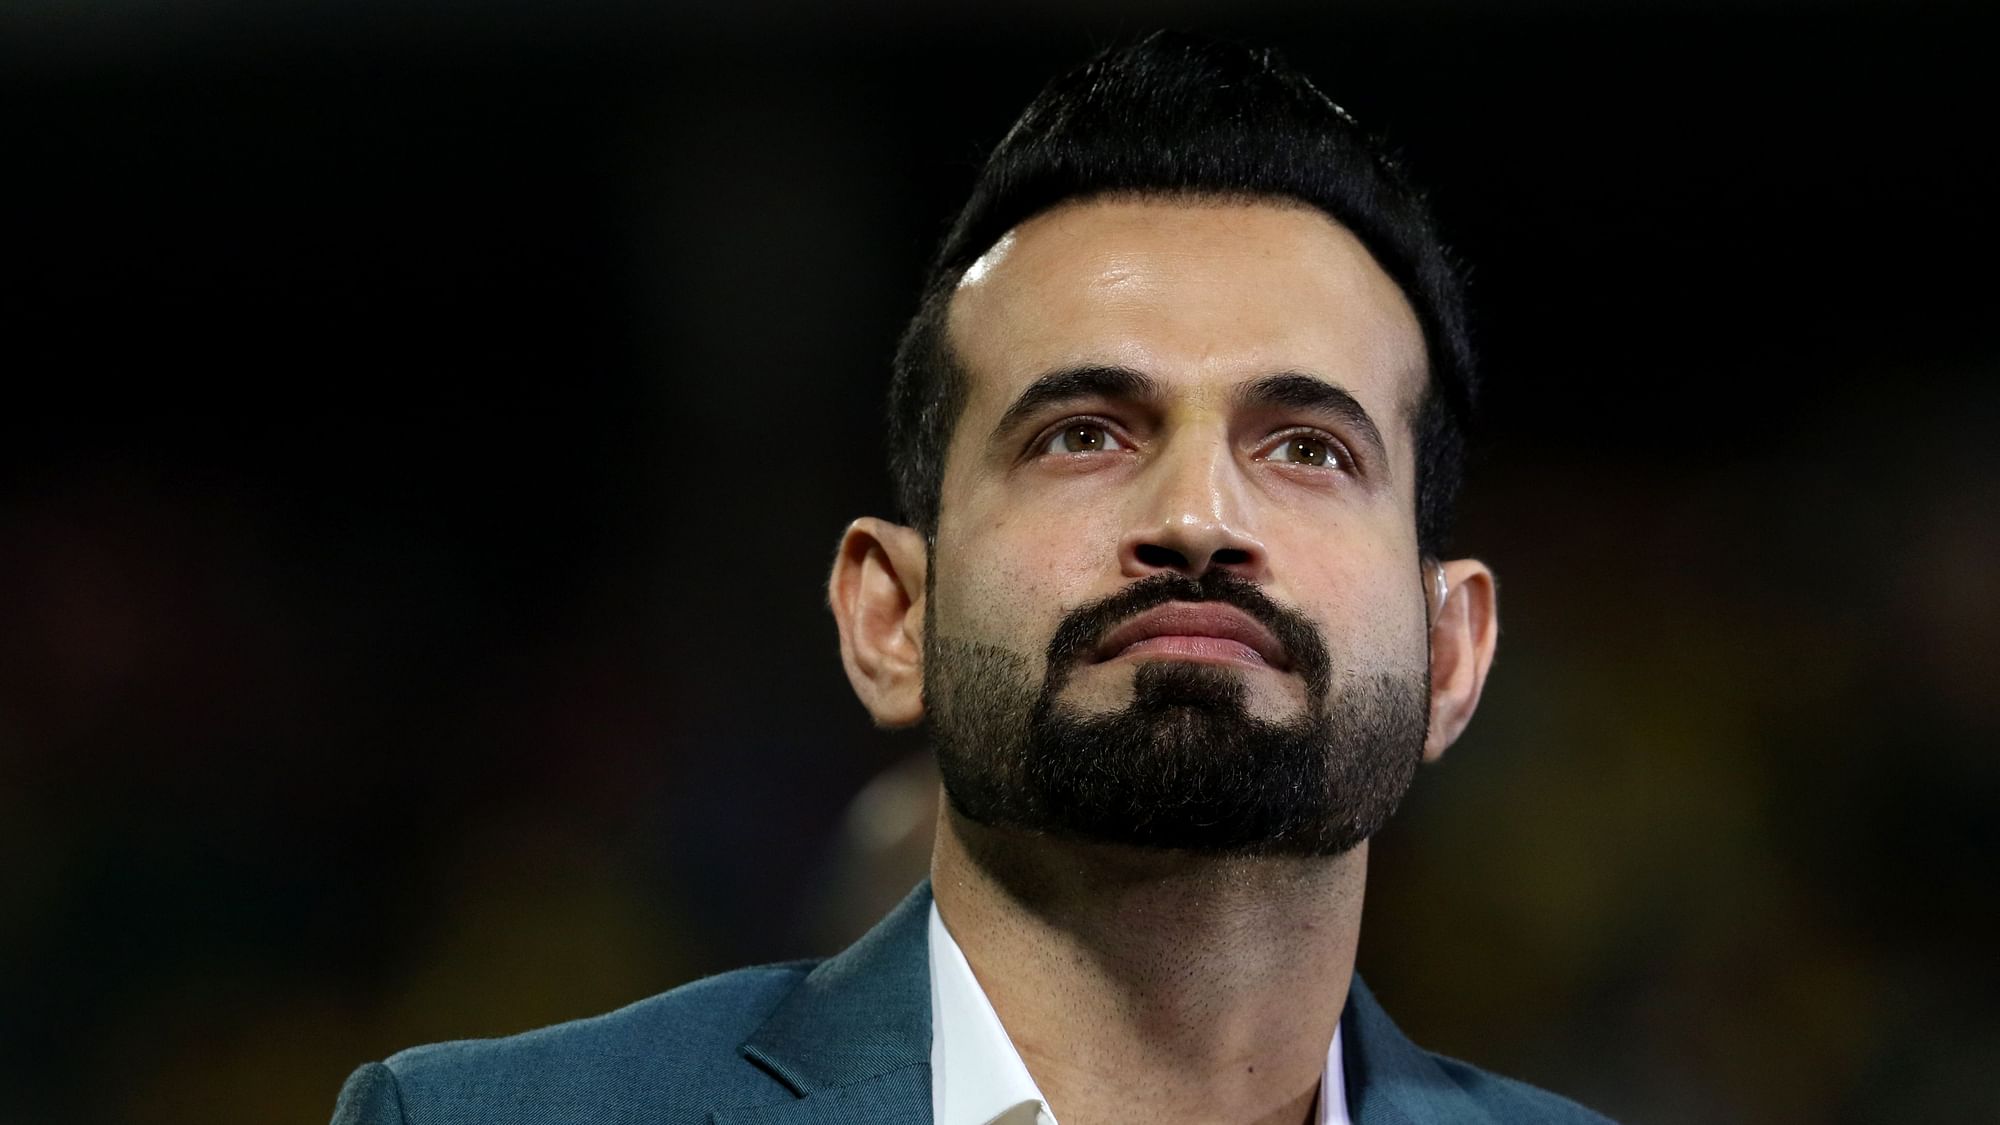 Was Irfan Pathan’s cryptic tweet on age aimed at MS Dhoni?